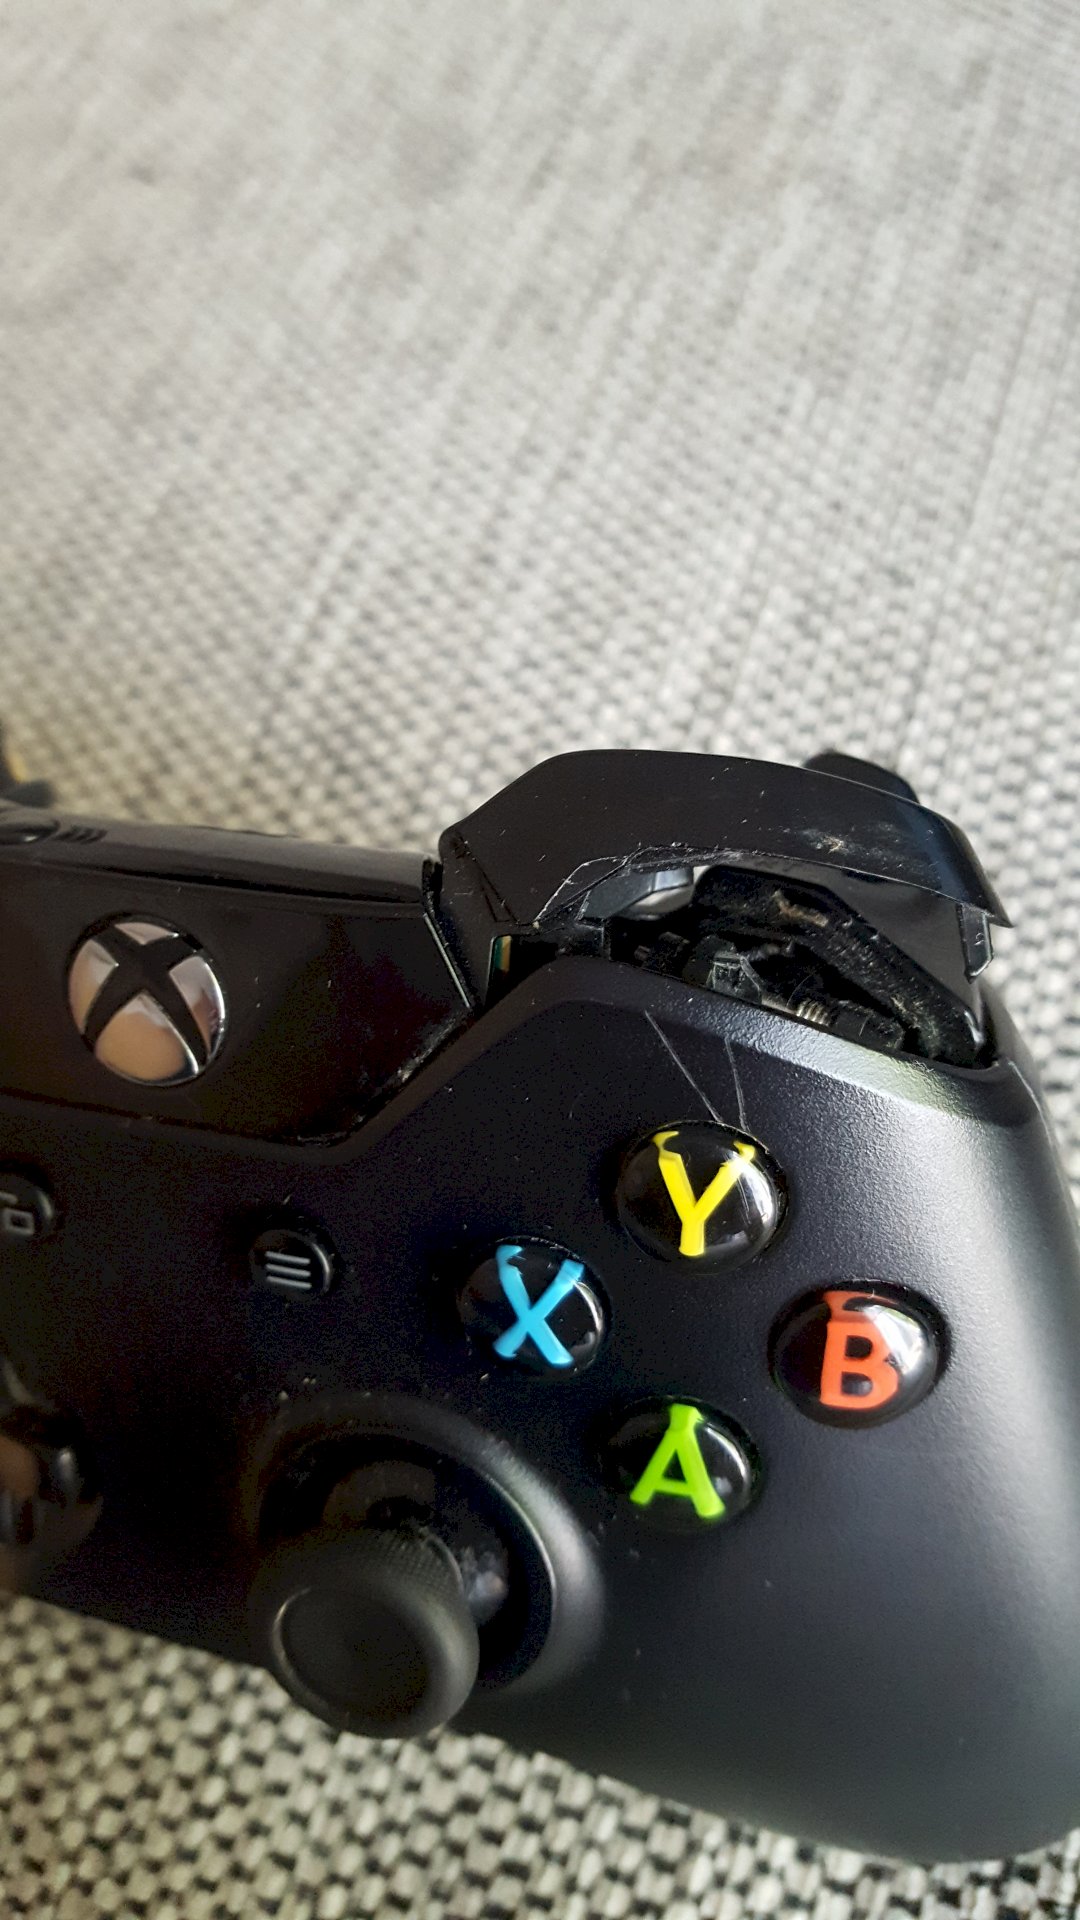 smashed xbox one controller